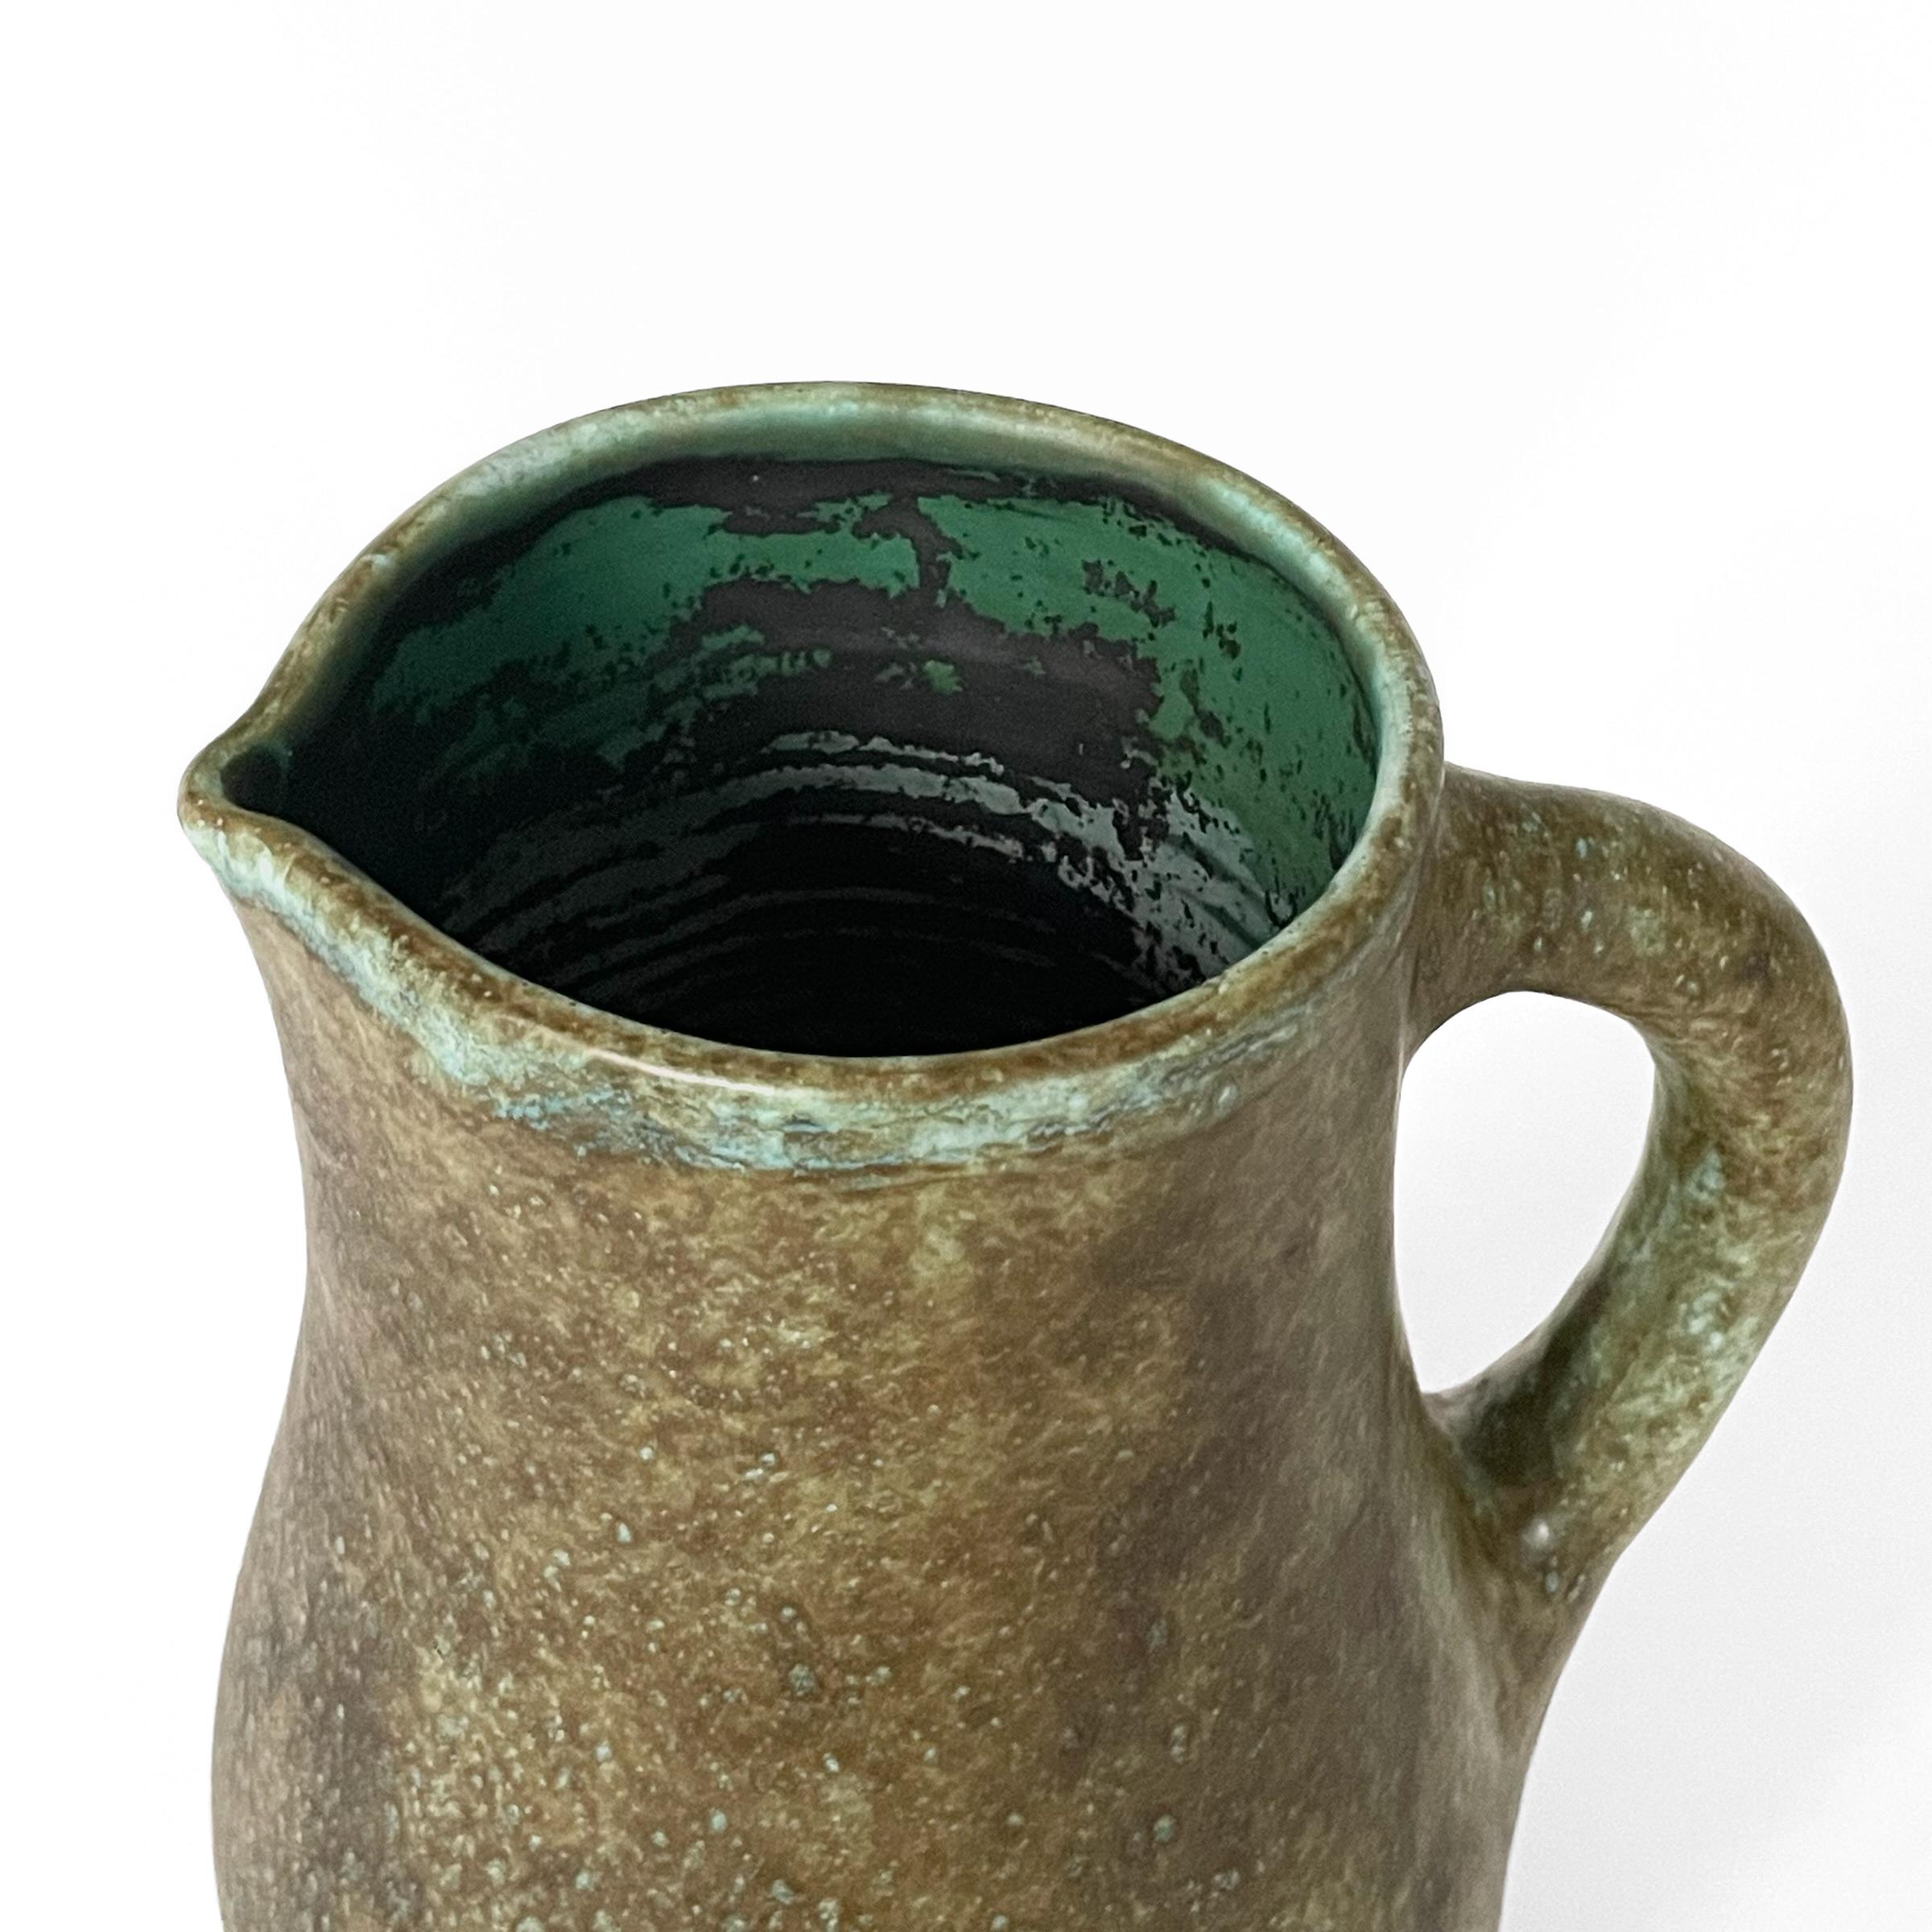 Ceramic pitcher by Jacques and Michelle Serre, Les 2 potiers, circa 1950 2